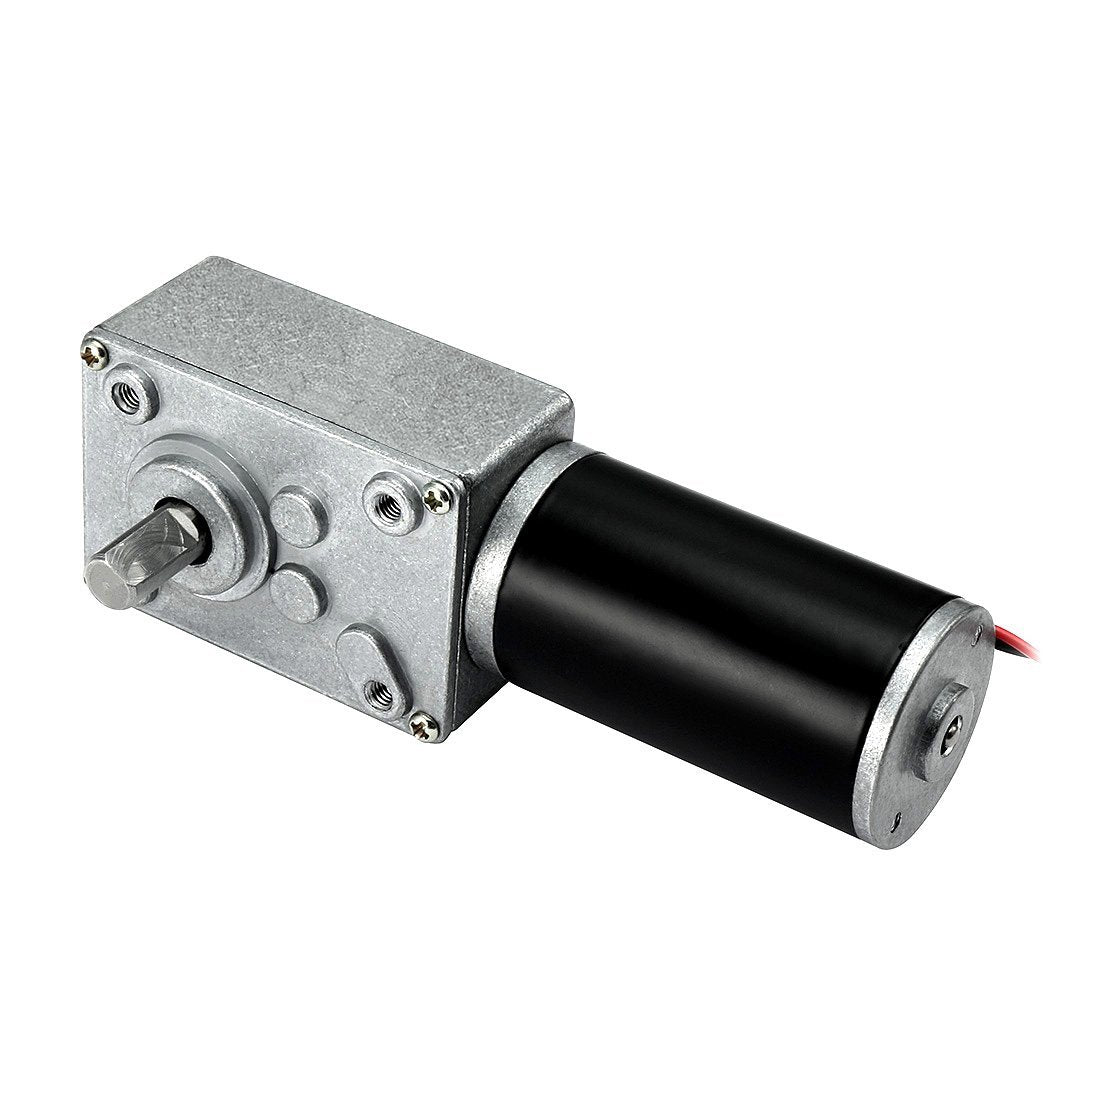 uxcell Uxcell DC 24V 70RPM High Torque Electric Power Speed Reduce Turbine Worm Gear Box Motor